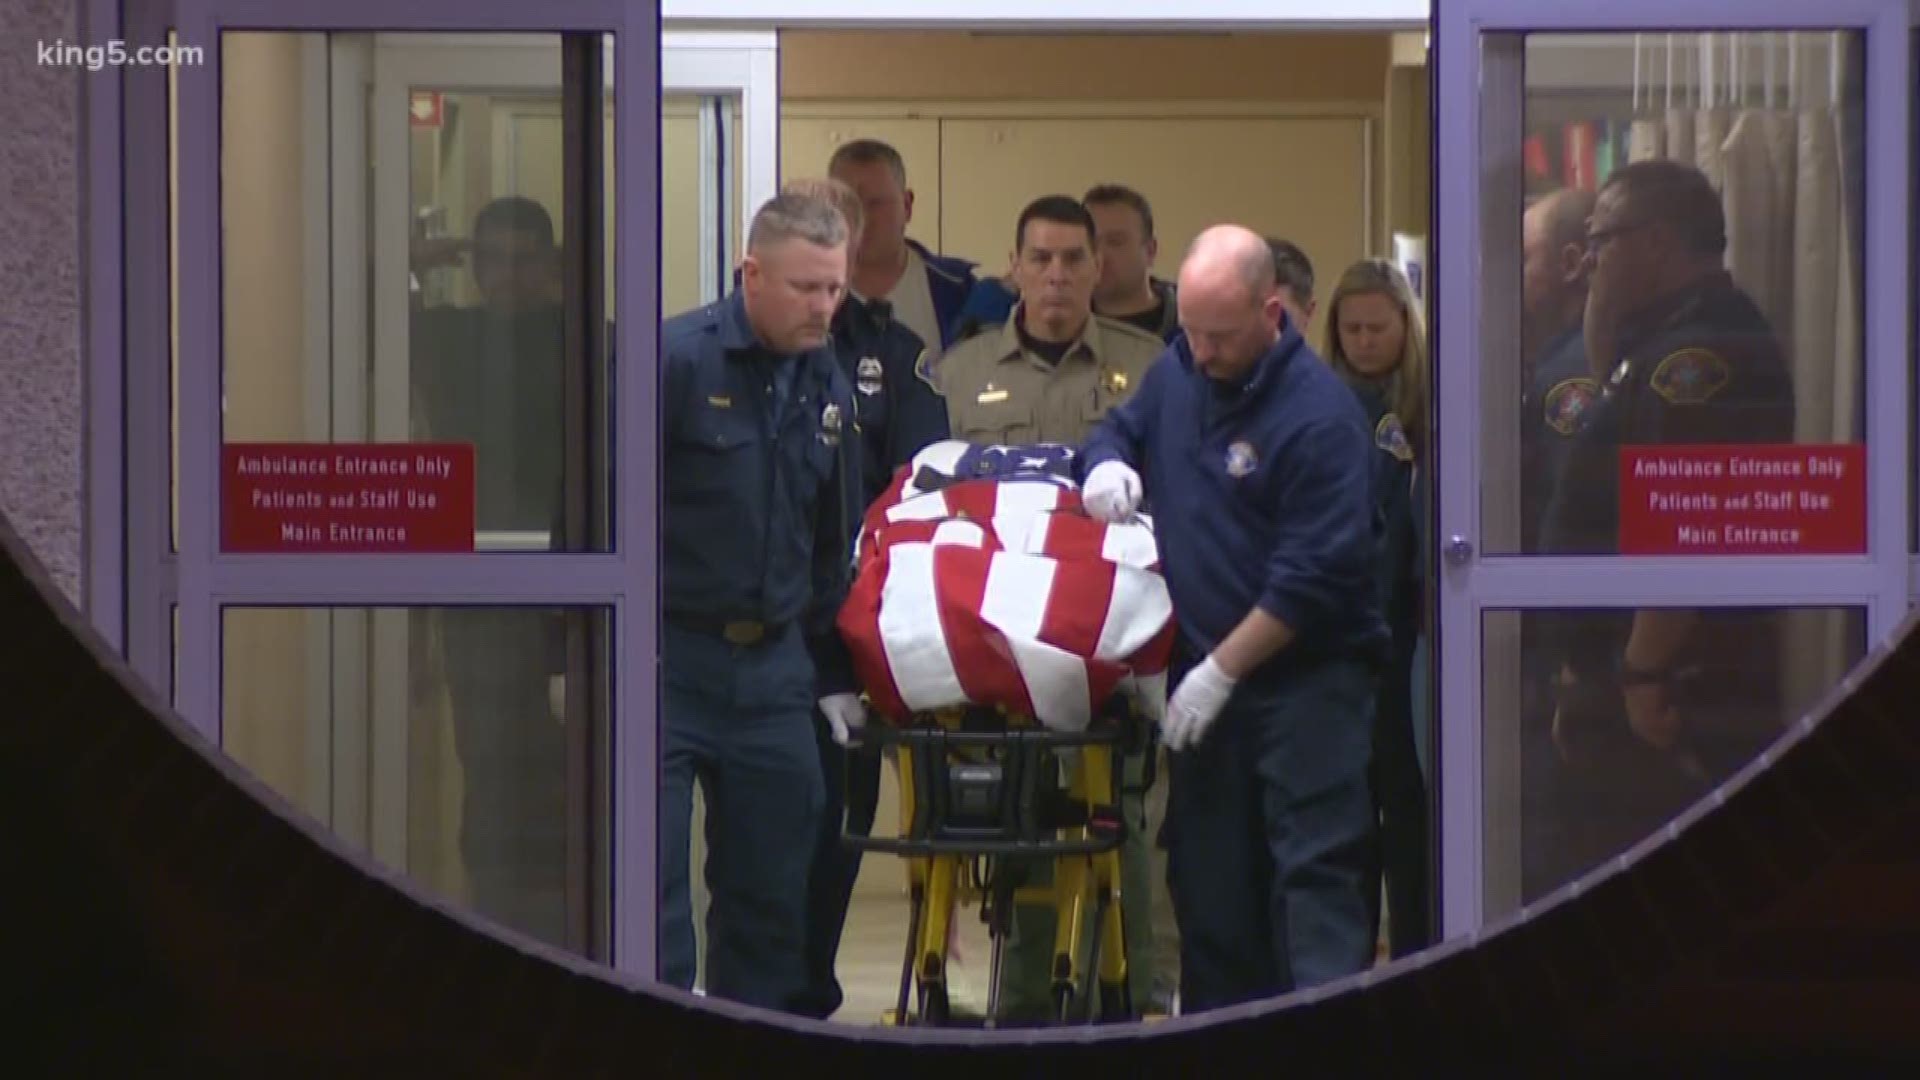 The Kittitas County sheriff’s deputy killed in the line of duty was identified as Ryan Thompson, a 14-year veteran of the department. Fellow law enforcement and community members paid tribute to Deputy Thompson on Wednesday.